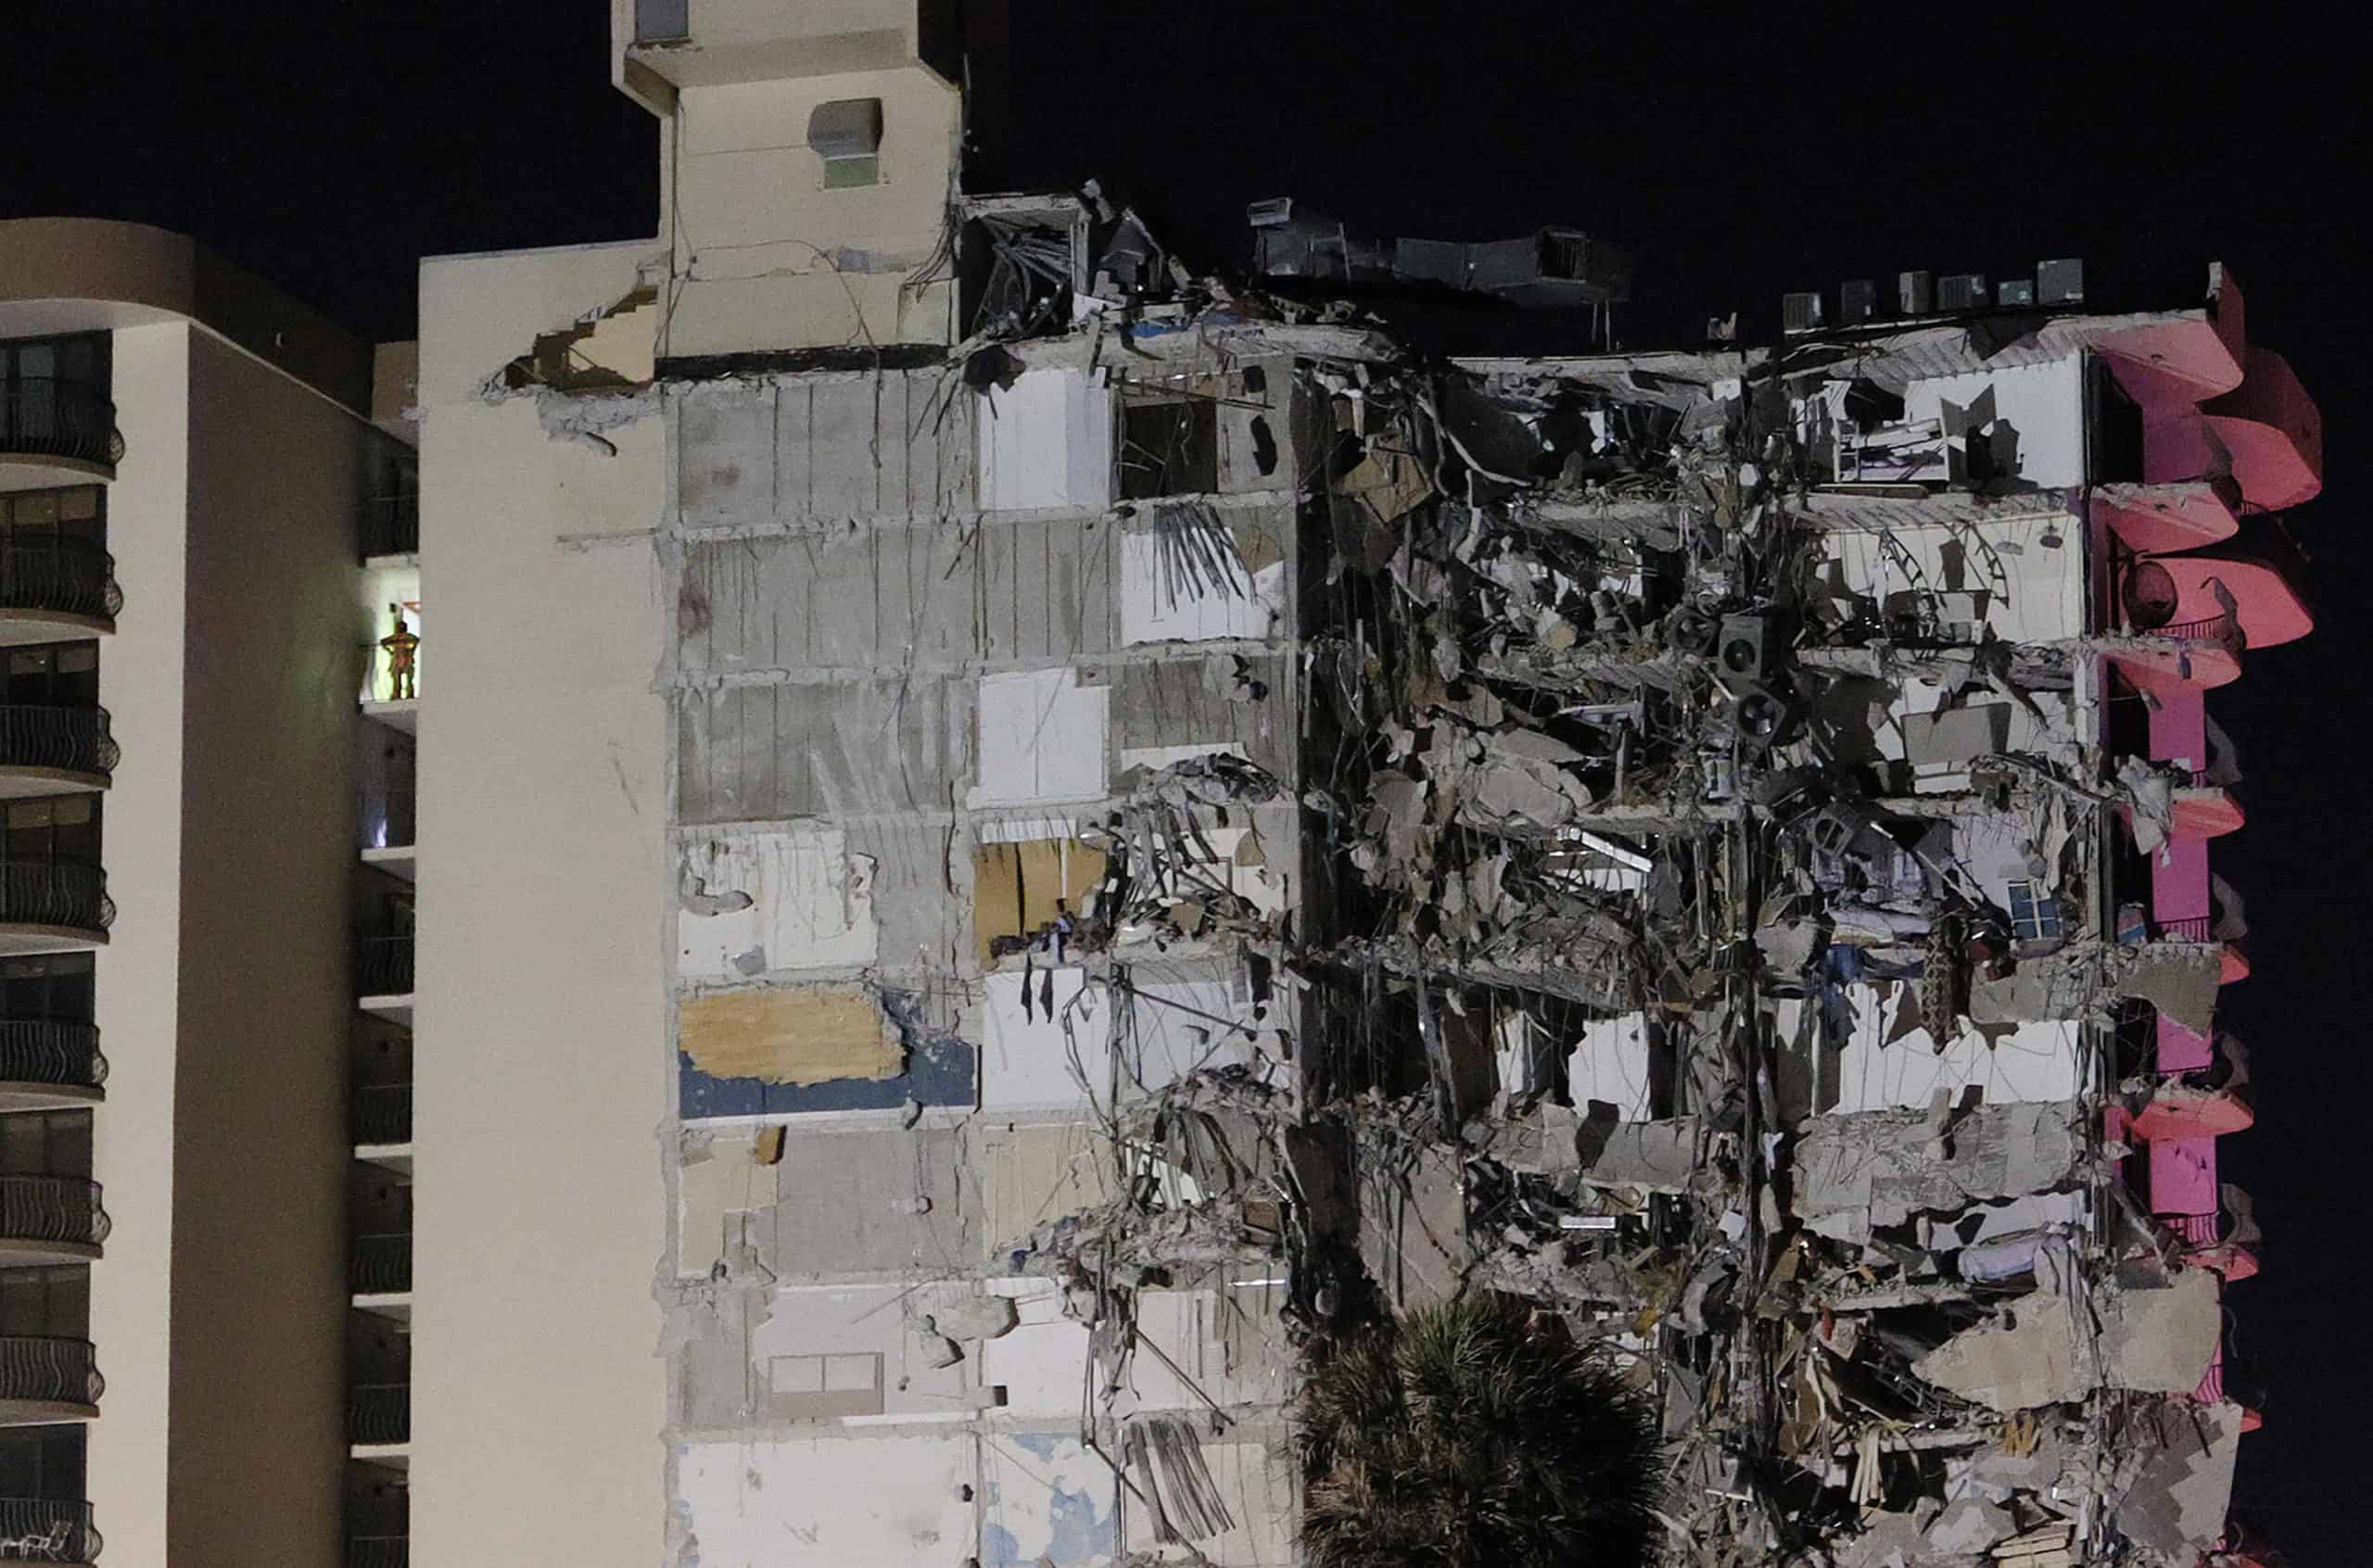 Authorities say that four people are now dead and 159 people are unaccounted for following the building collapse in Miami.